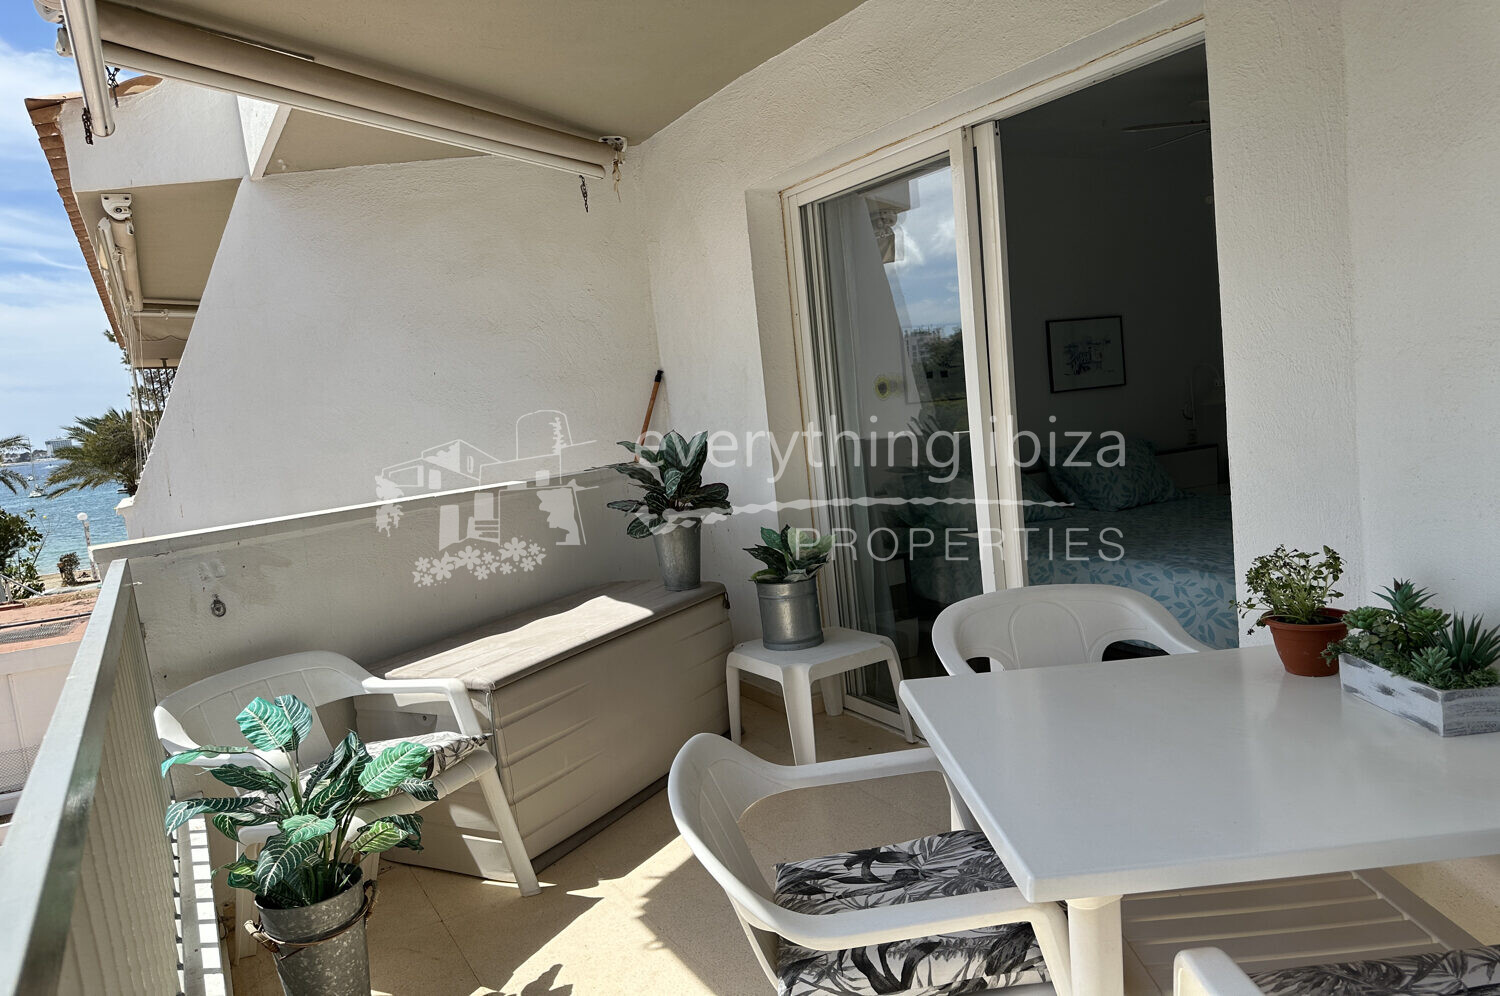 Charming One Bed Apartment Close to the Beach and Bay, ref. 1602, for sale in Ibiza by everything ibiza Properties